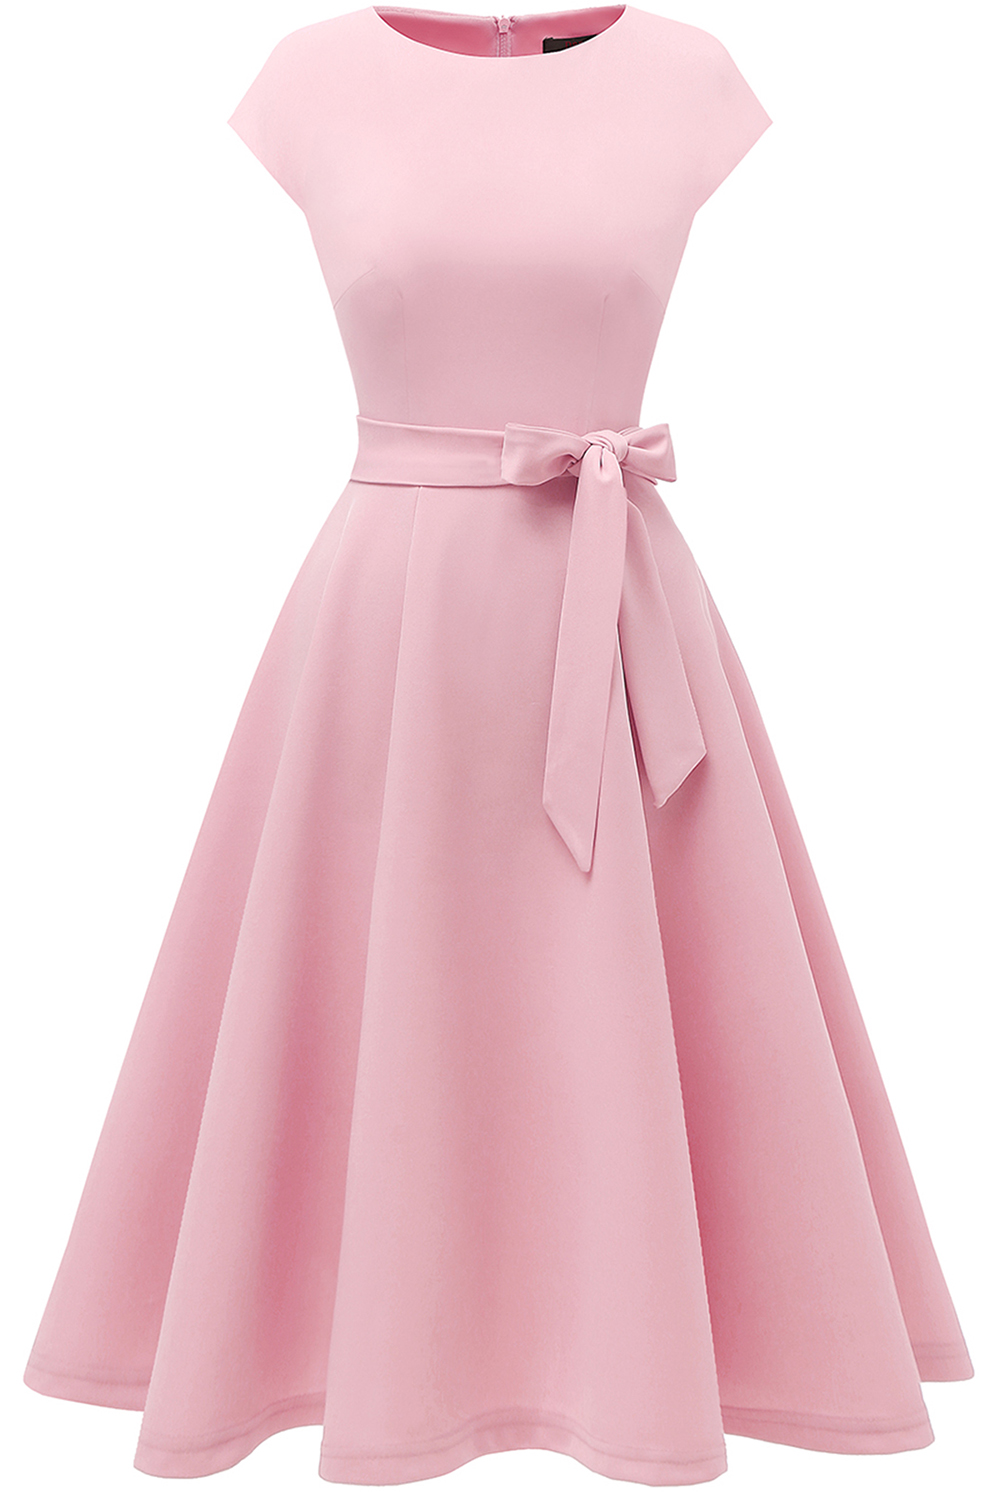 A-Line Knee-Length Pink Cocktail Dress with Cap Sleeves, Vintage Style, Unique and Elegant